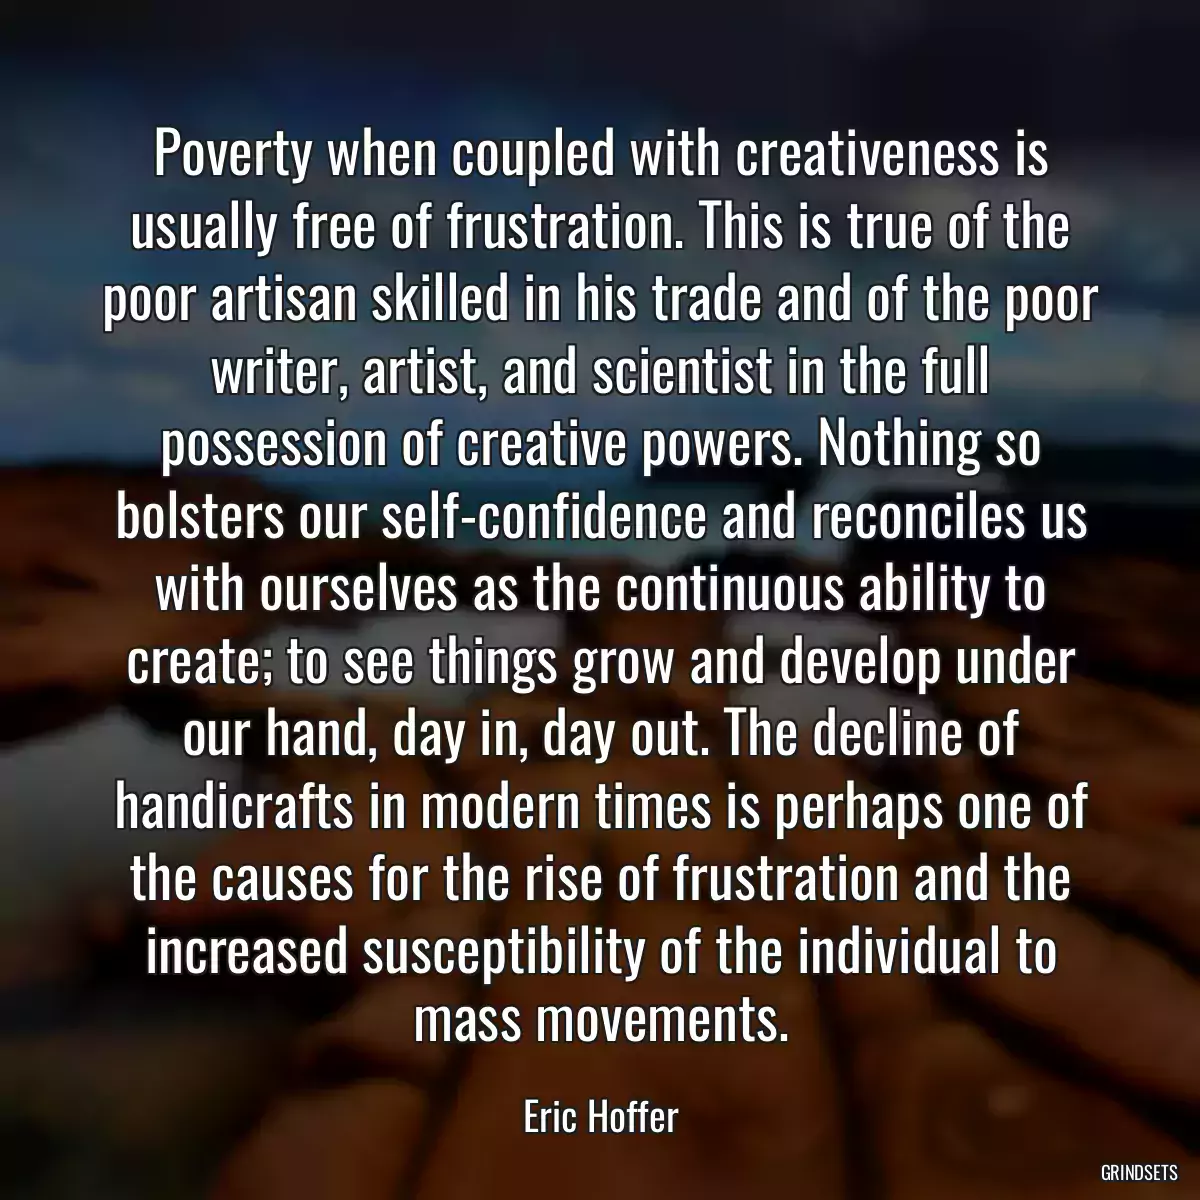 Poverty when coupled with creativeness is usually free of frustration. This is true of the poor artisan skilled in his trade and of the poor writer, artist, and scientist in the full possession of creative powers. Nothing so bolsters our self-confidence and reconciles us with ourselves as the continuous ability to create; to see things grow and develop under our hand, day in, day out. The decline of handicrafts in modern times is perhaps one of the causes for the rise of frustration and the increased susceptibility of the individual to mass movements.